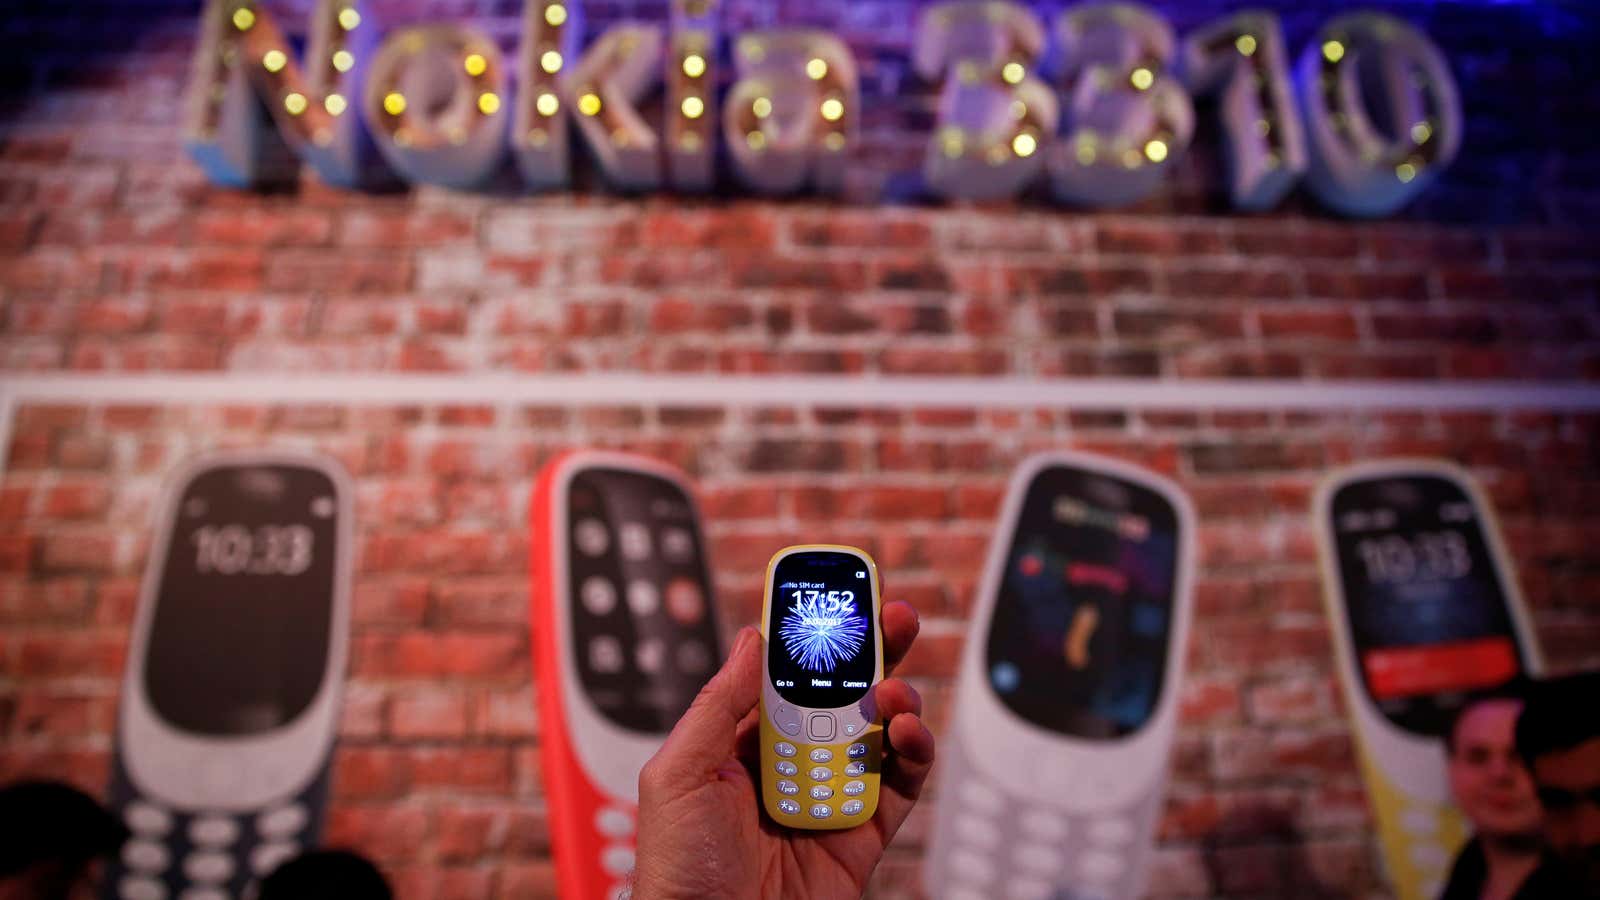 Nokia 3310 returns for $52 and it has Snake